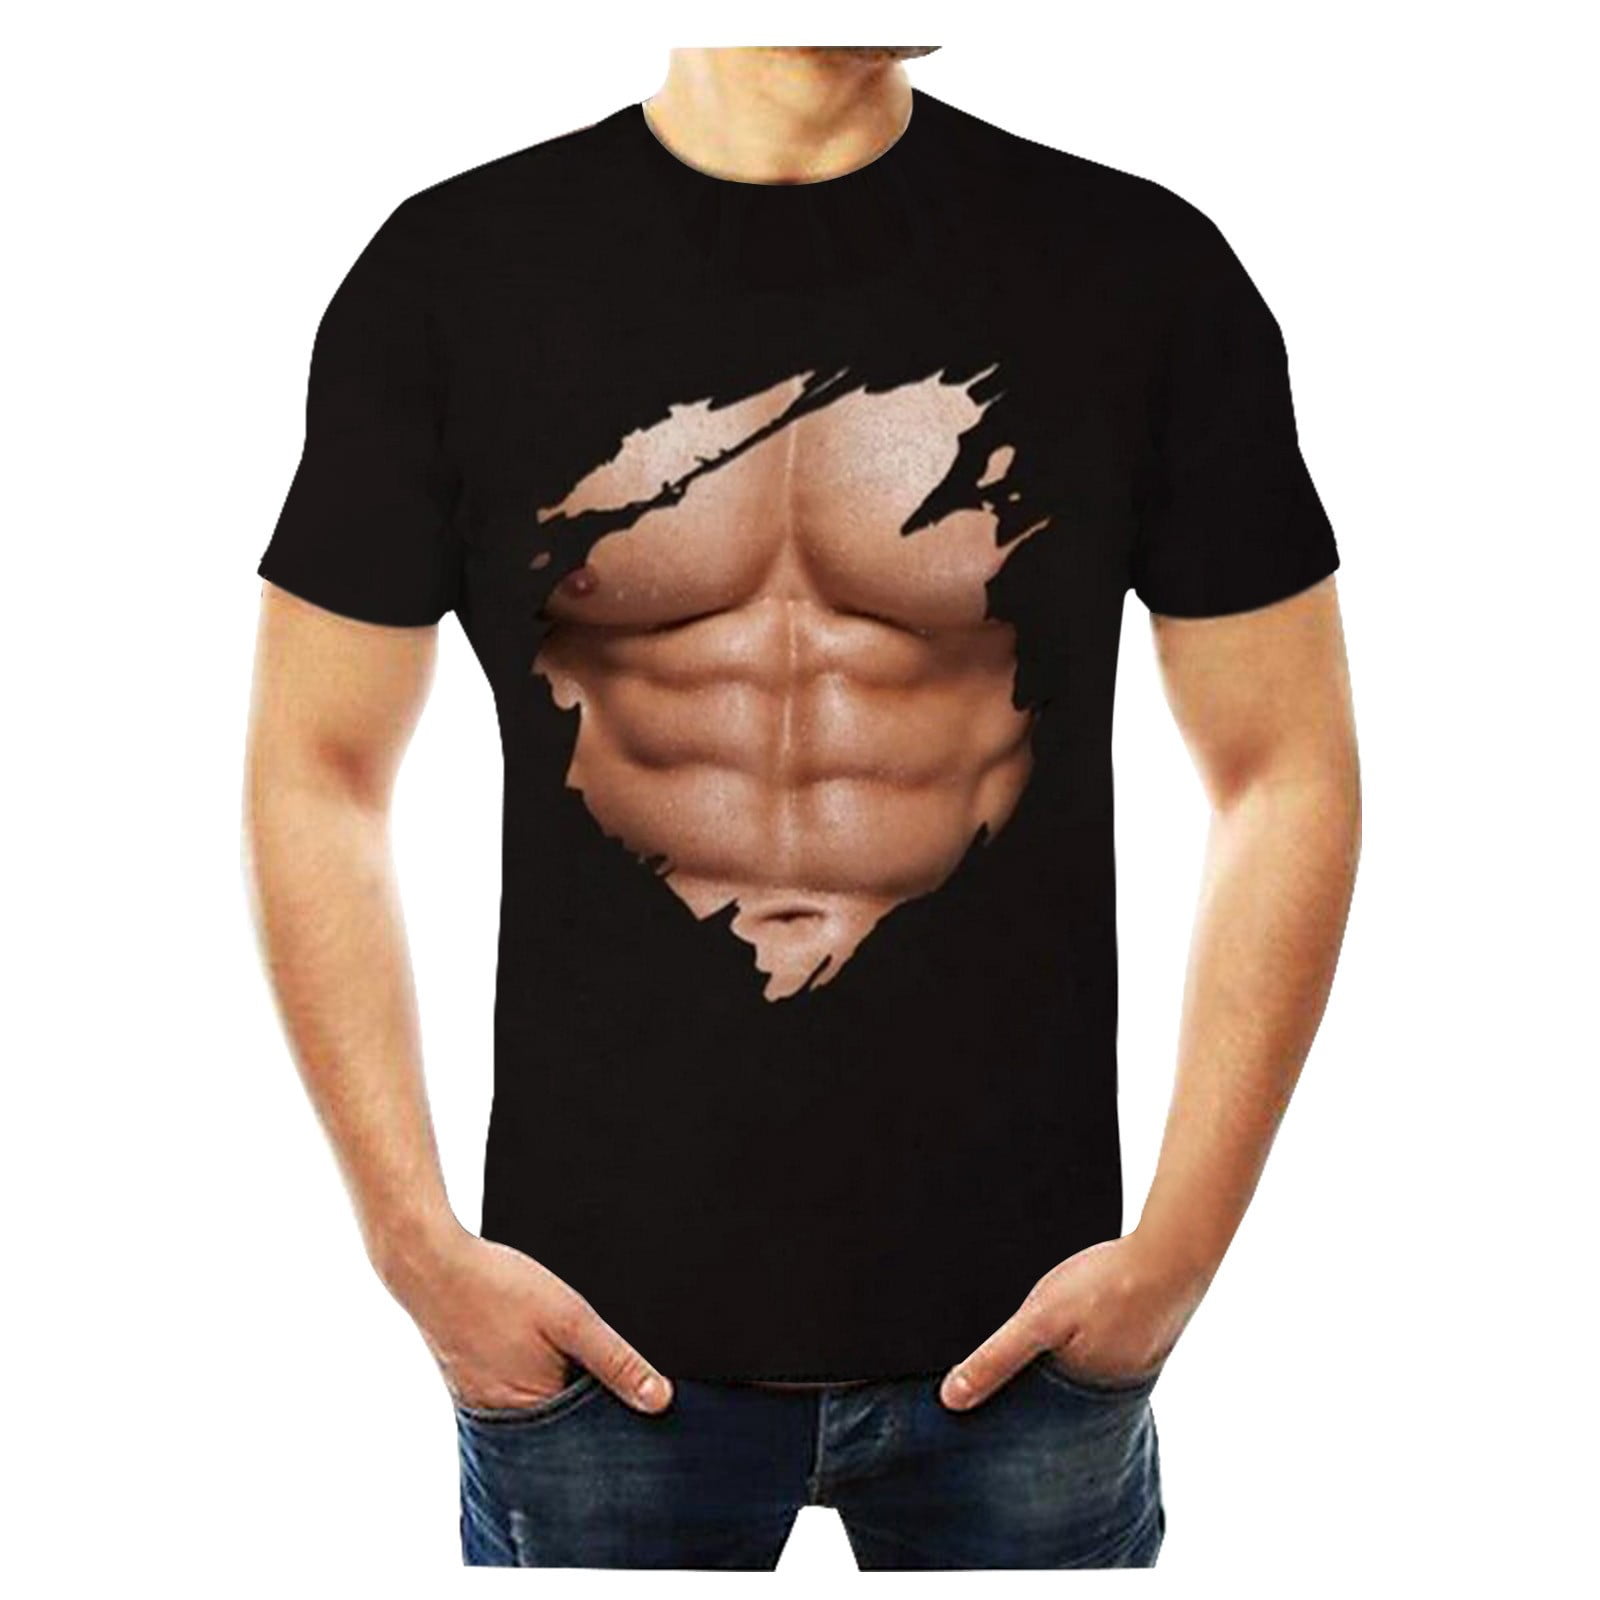 Men's Active Gym Muscle Fit Ombre Seamless T-Shirt